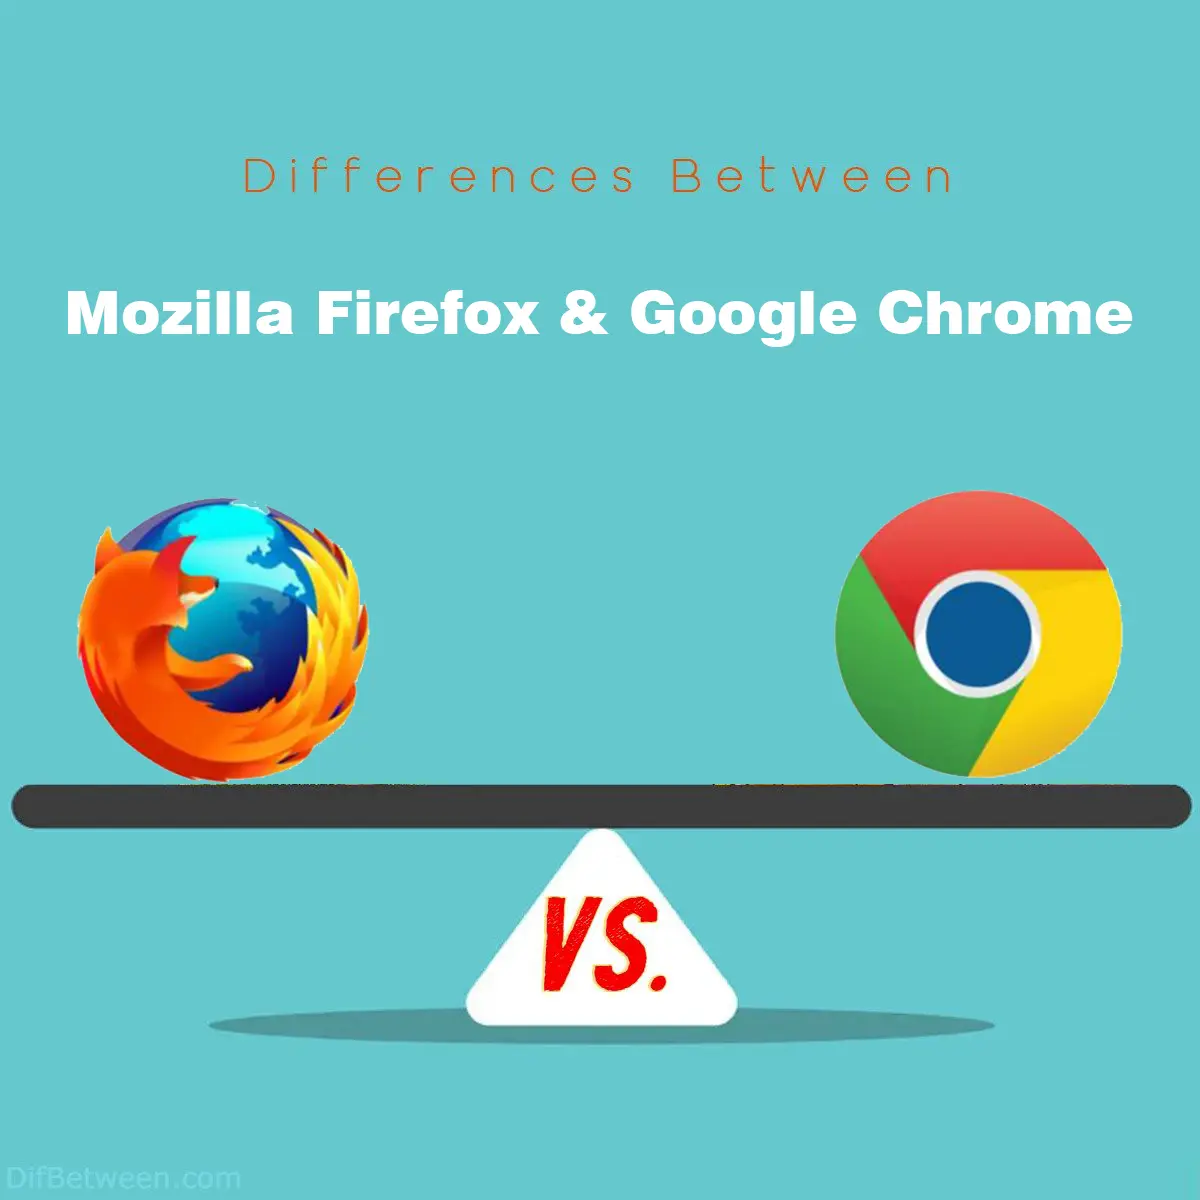 Differences Between Mozilla Firefox and Google Chrome